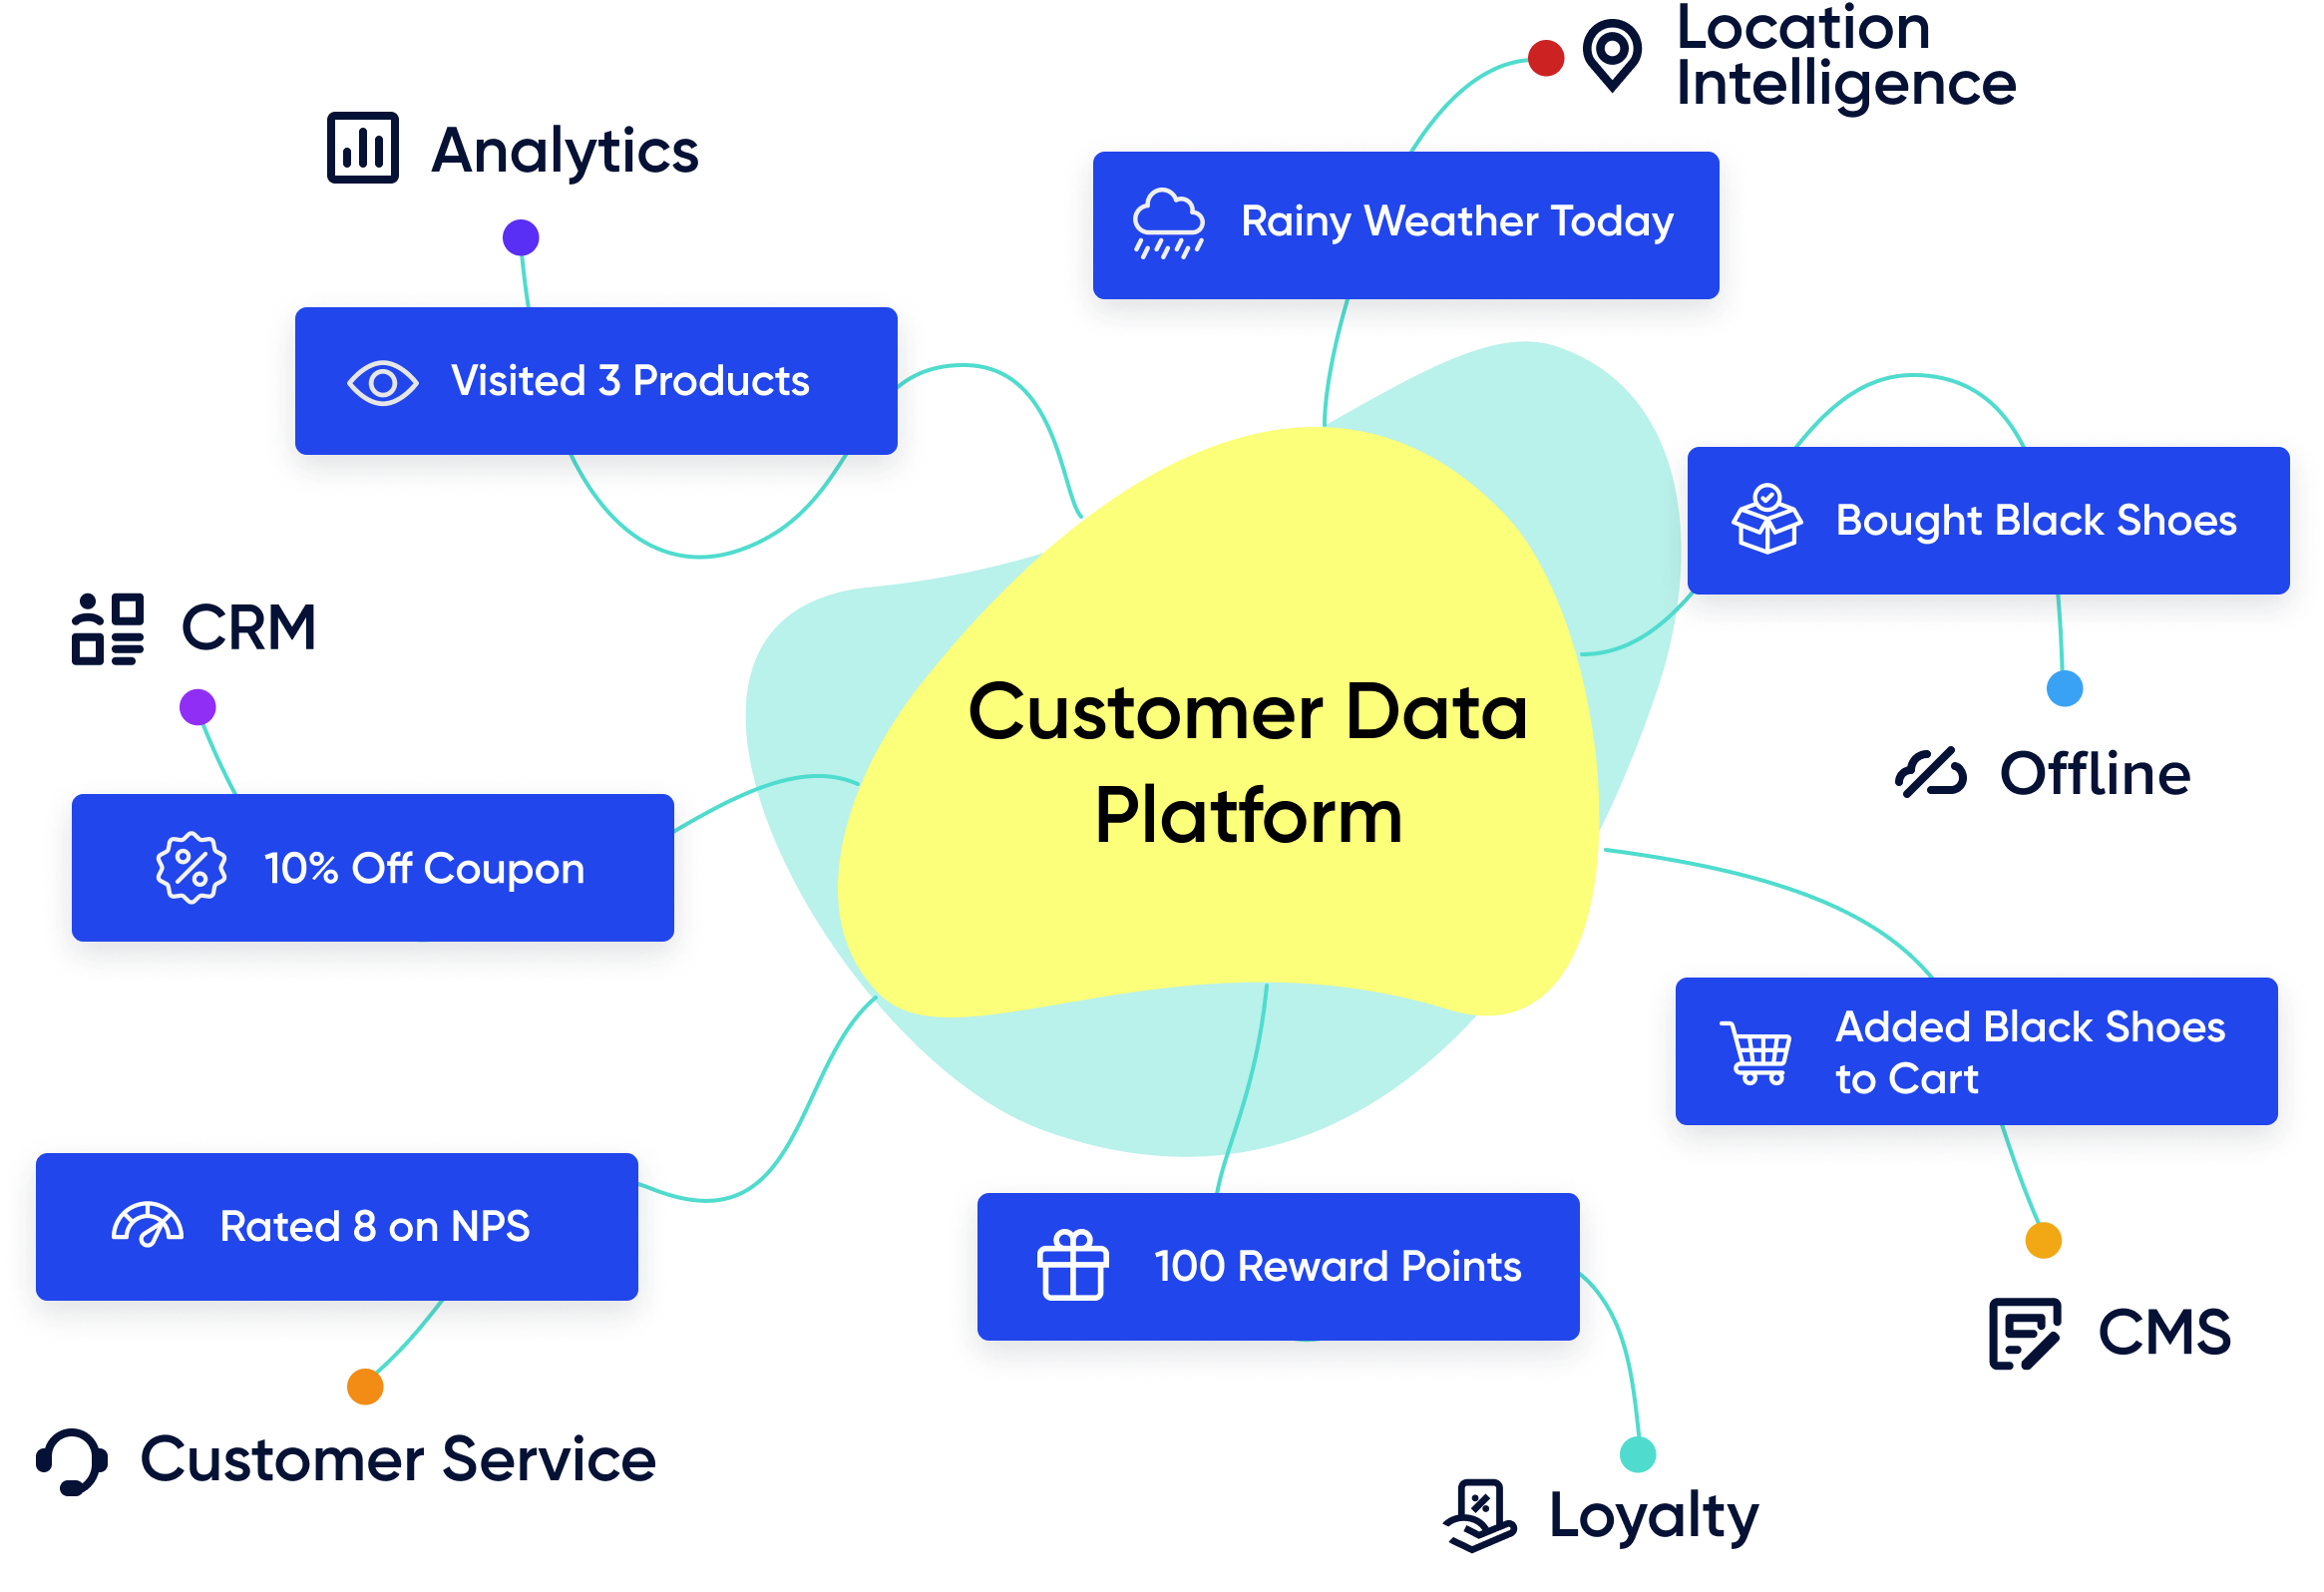 Explore 50+ high-impact Customer Data Platform (CDP) use cases to increase customer acquisition, conversion, and loyalty